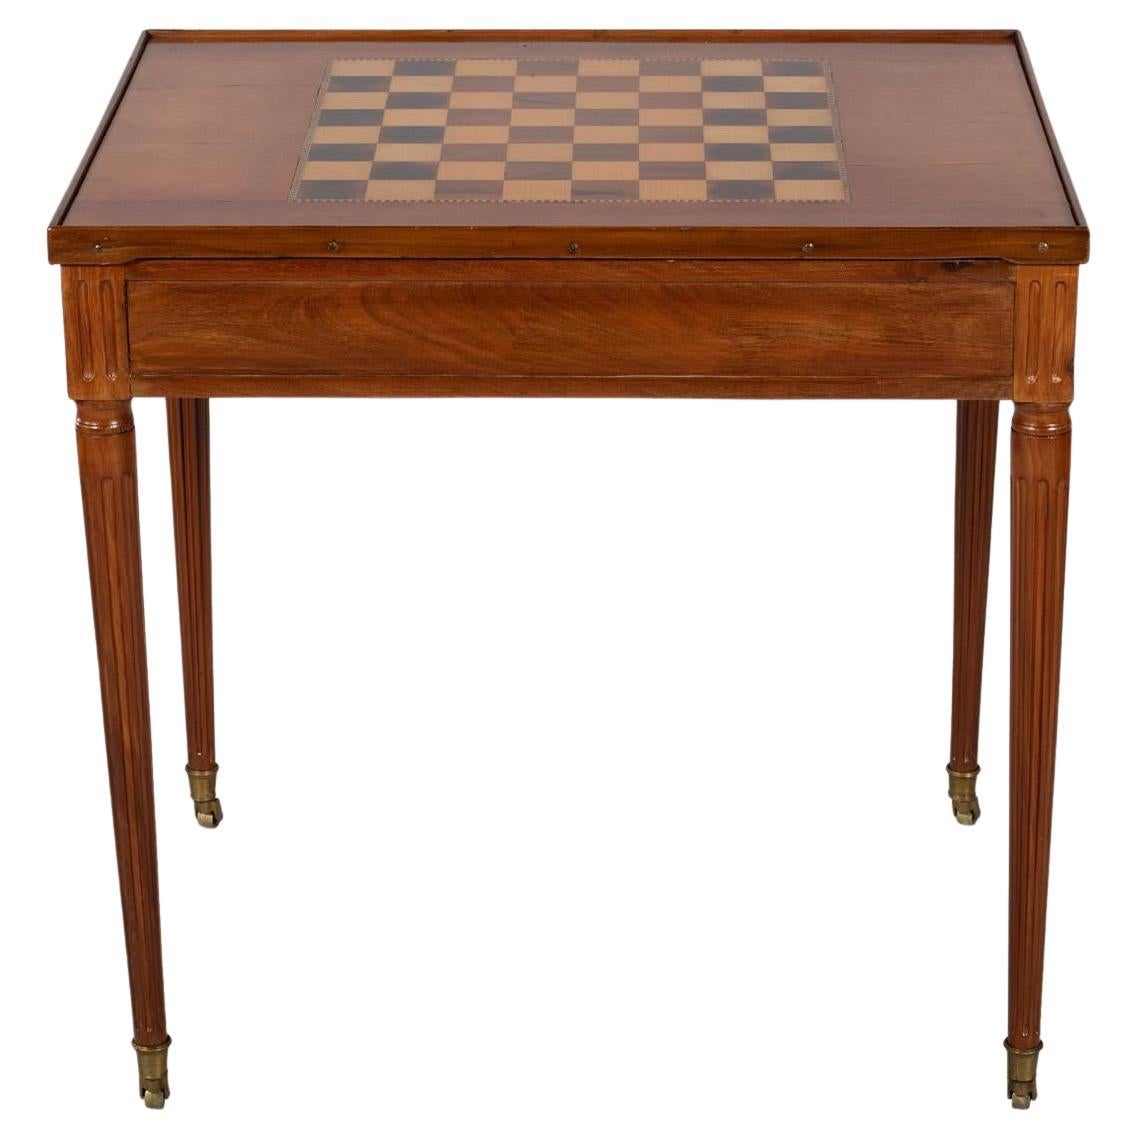 Late 18th Century Louis XVI Mahogany and Marquetry Inlaid Tric-Trac Games Table